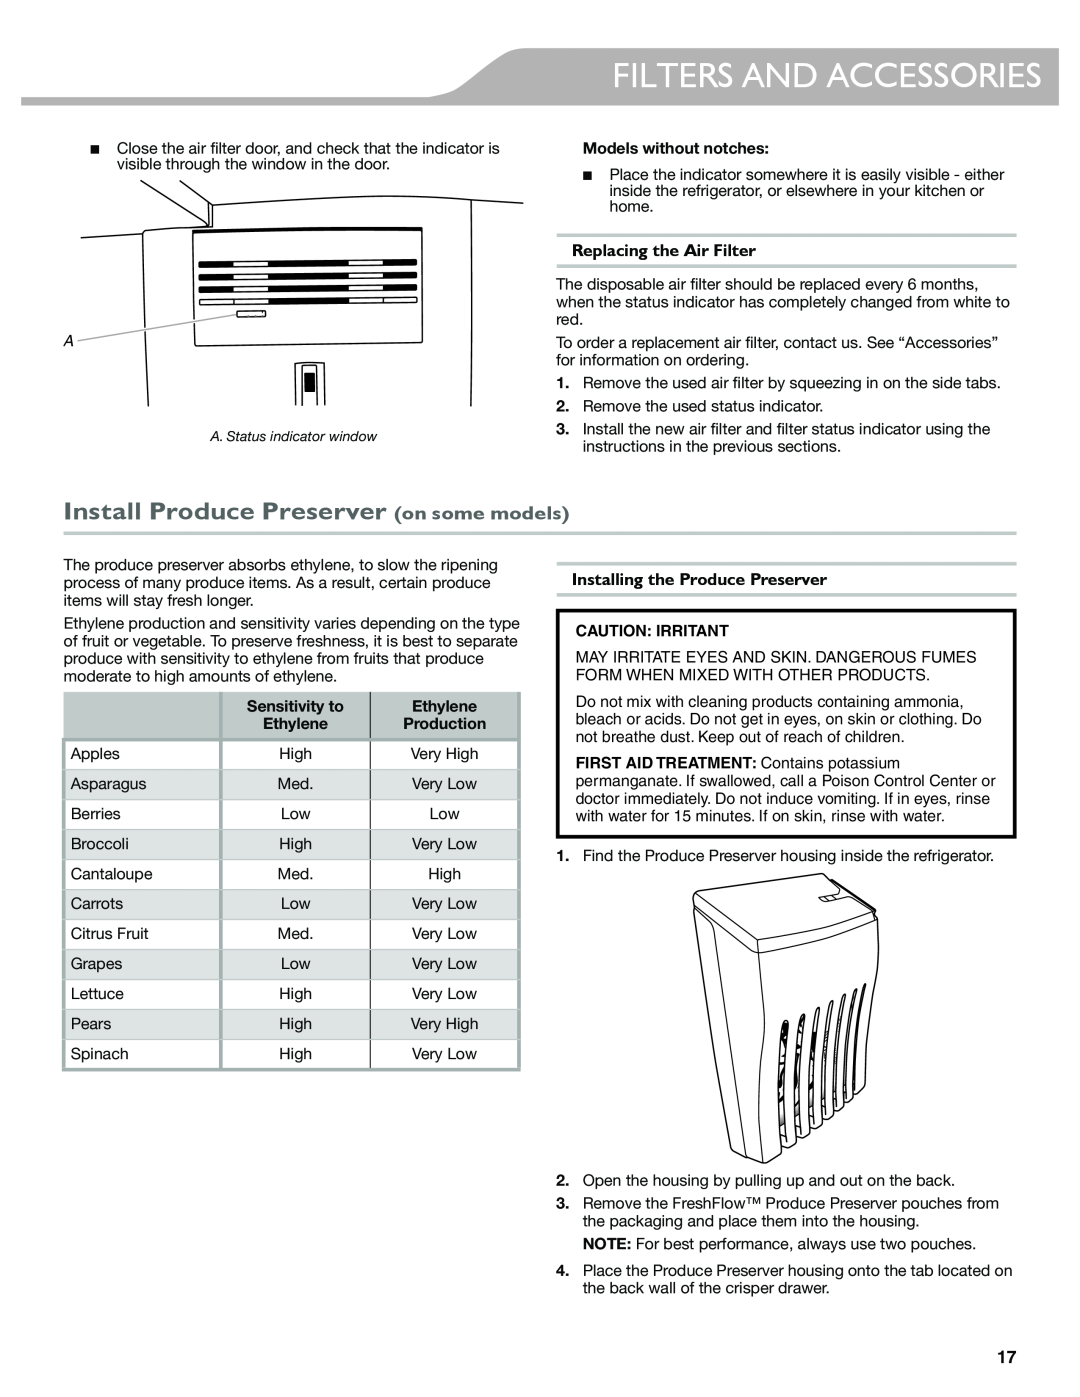 KitchenAid W10417002A manual Filters And Accessories, Install Produce Preserver on some models, Replacing the Air Filter 